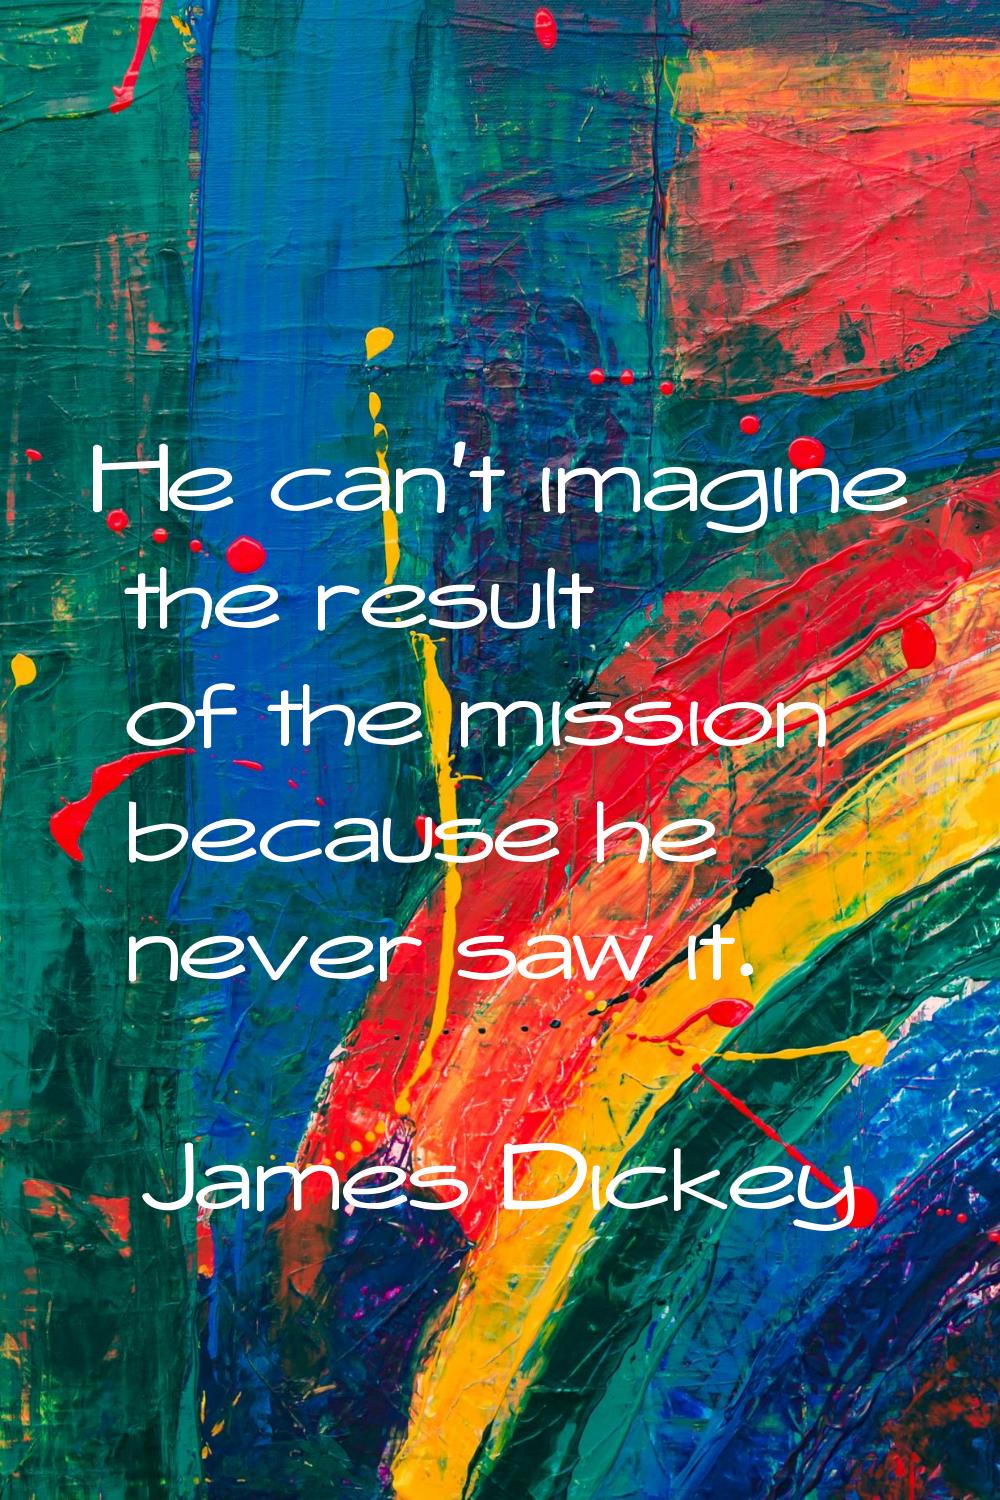 He can't imagine the result of the mission because he never saw it.